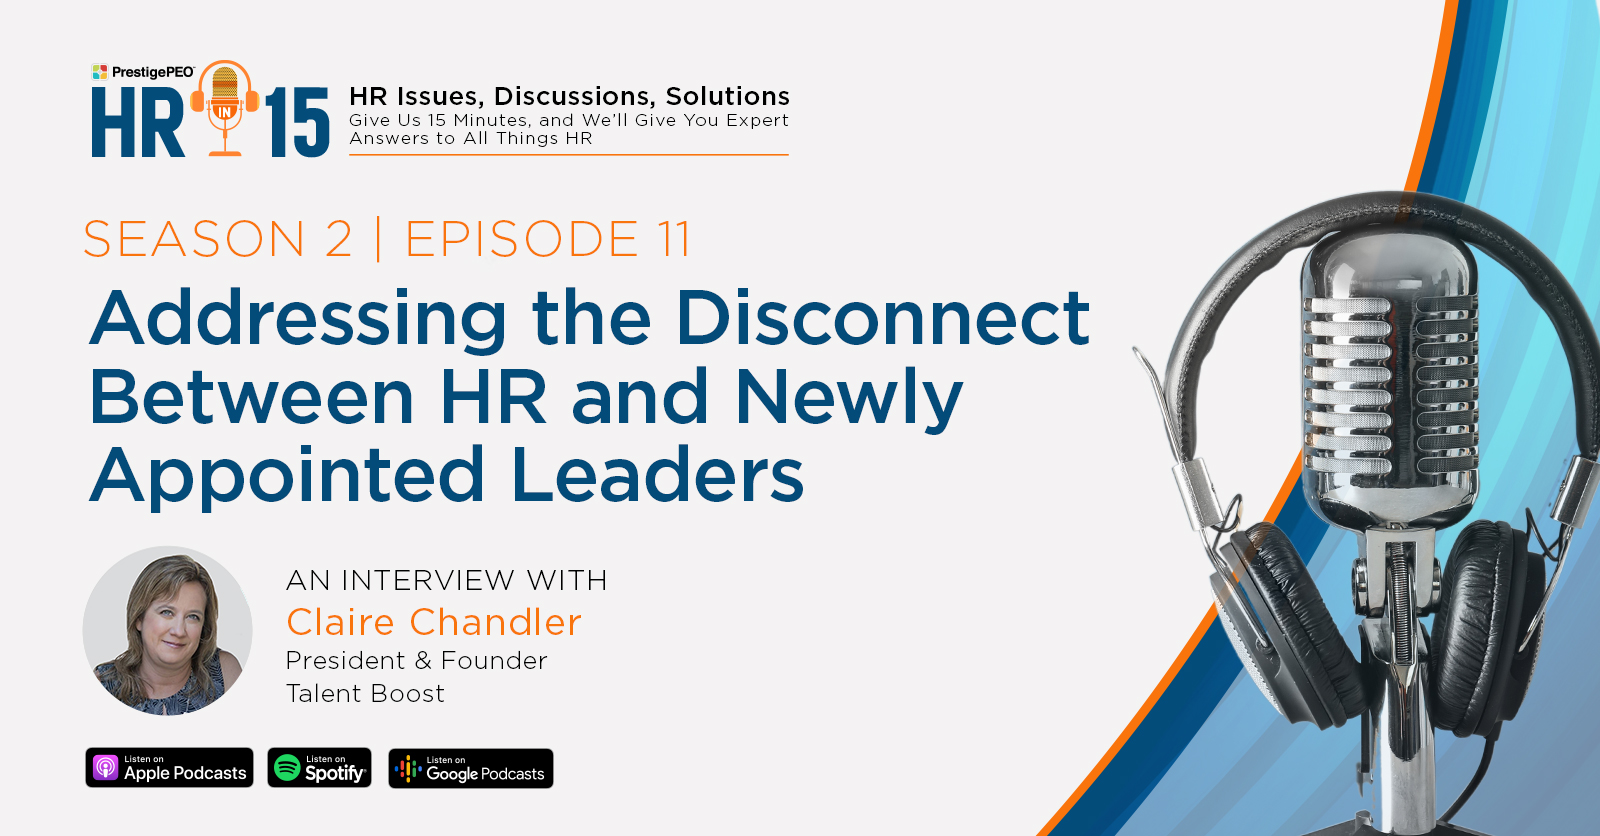 HR-in-15 Interview with Claire Chandler: Addressing the disconnect between HR and newly appointed leaders